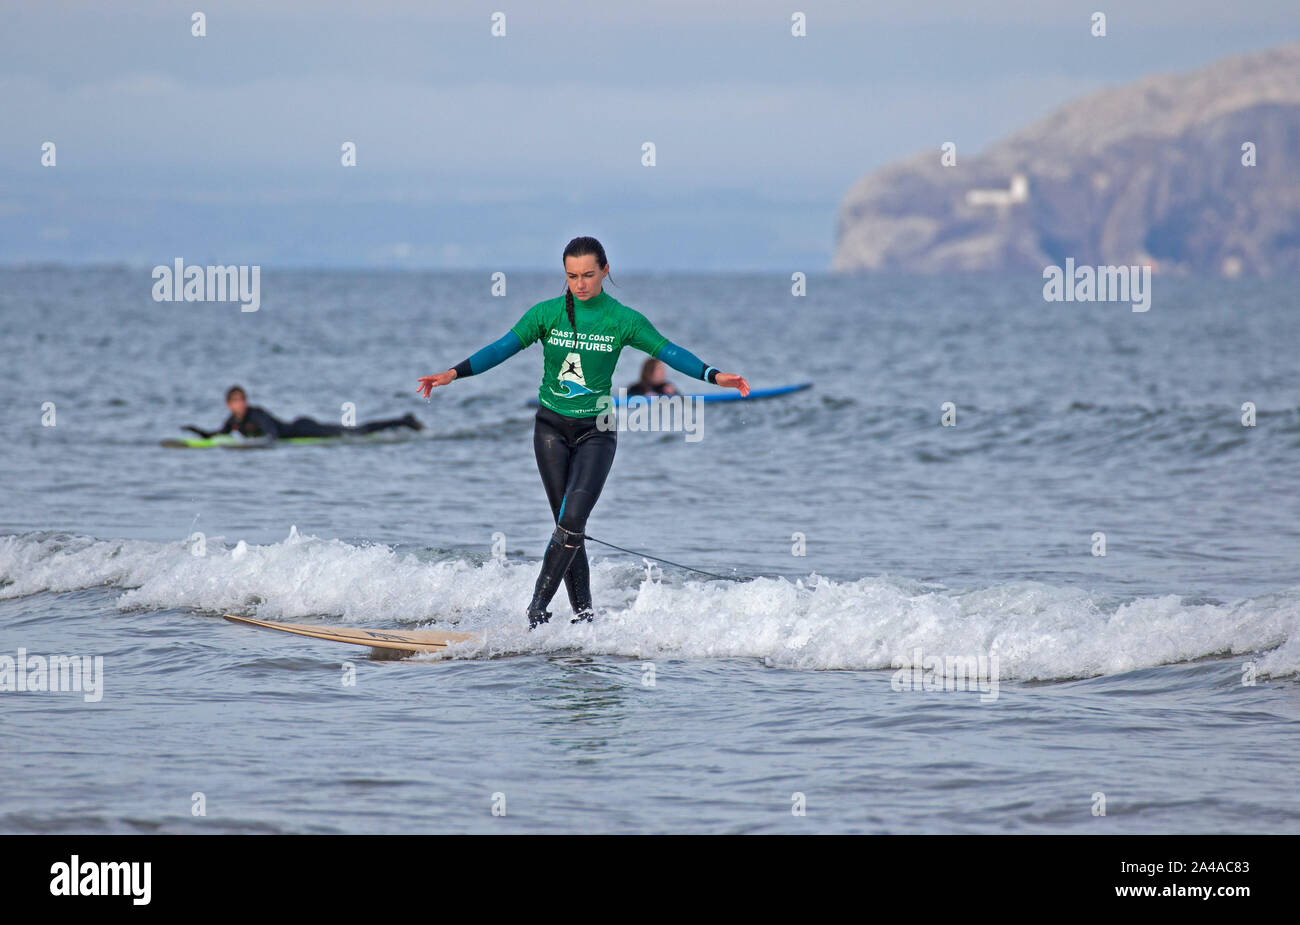 Belhaven Beach, East Lothian, Scotland, UK. 13th October 2019. Tens of Adults and youngsters took part in the Lowland Longboard Surfing Contest, pictured some of the contestants taking part in the semi-finals of what is an annual event, this year held in Dunbar. True to the Longboarding style this event has a beautiful mellow feel to it, chilling out on Belhaven Beach watching some incredibly talented surfers.  Kids had  the opportunity to compete on three crafts! The U16yr Bodyboard and U18yr Longboard are qualifying events for the Scottish National Team. Stock Photo